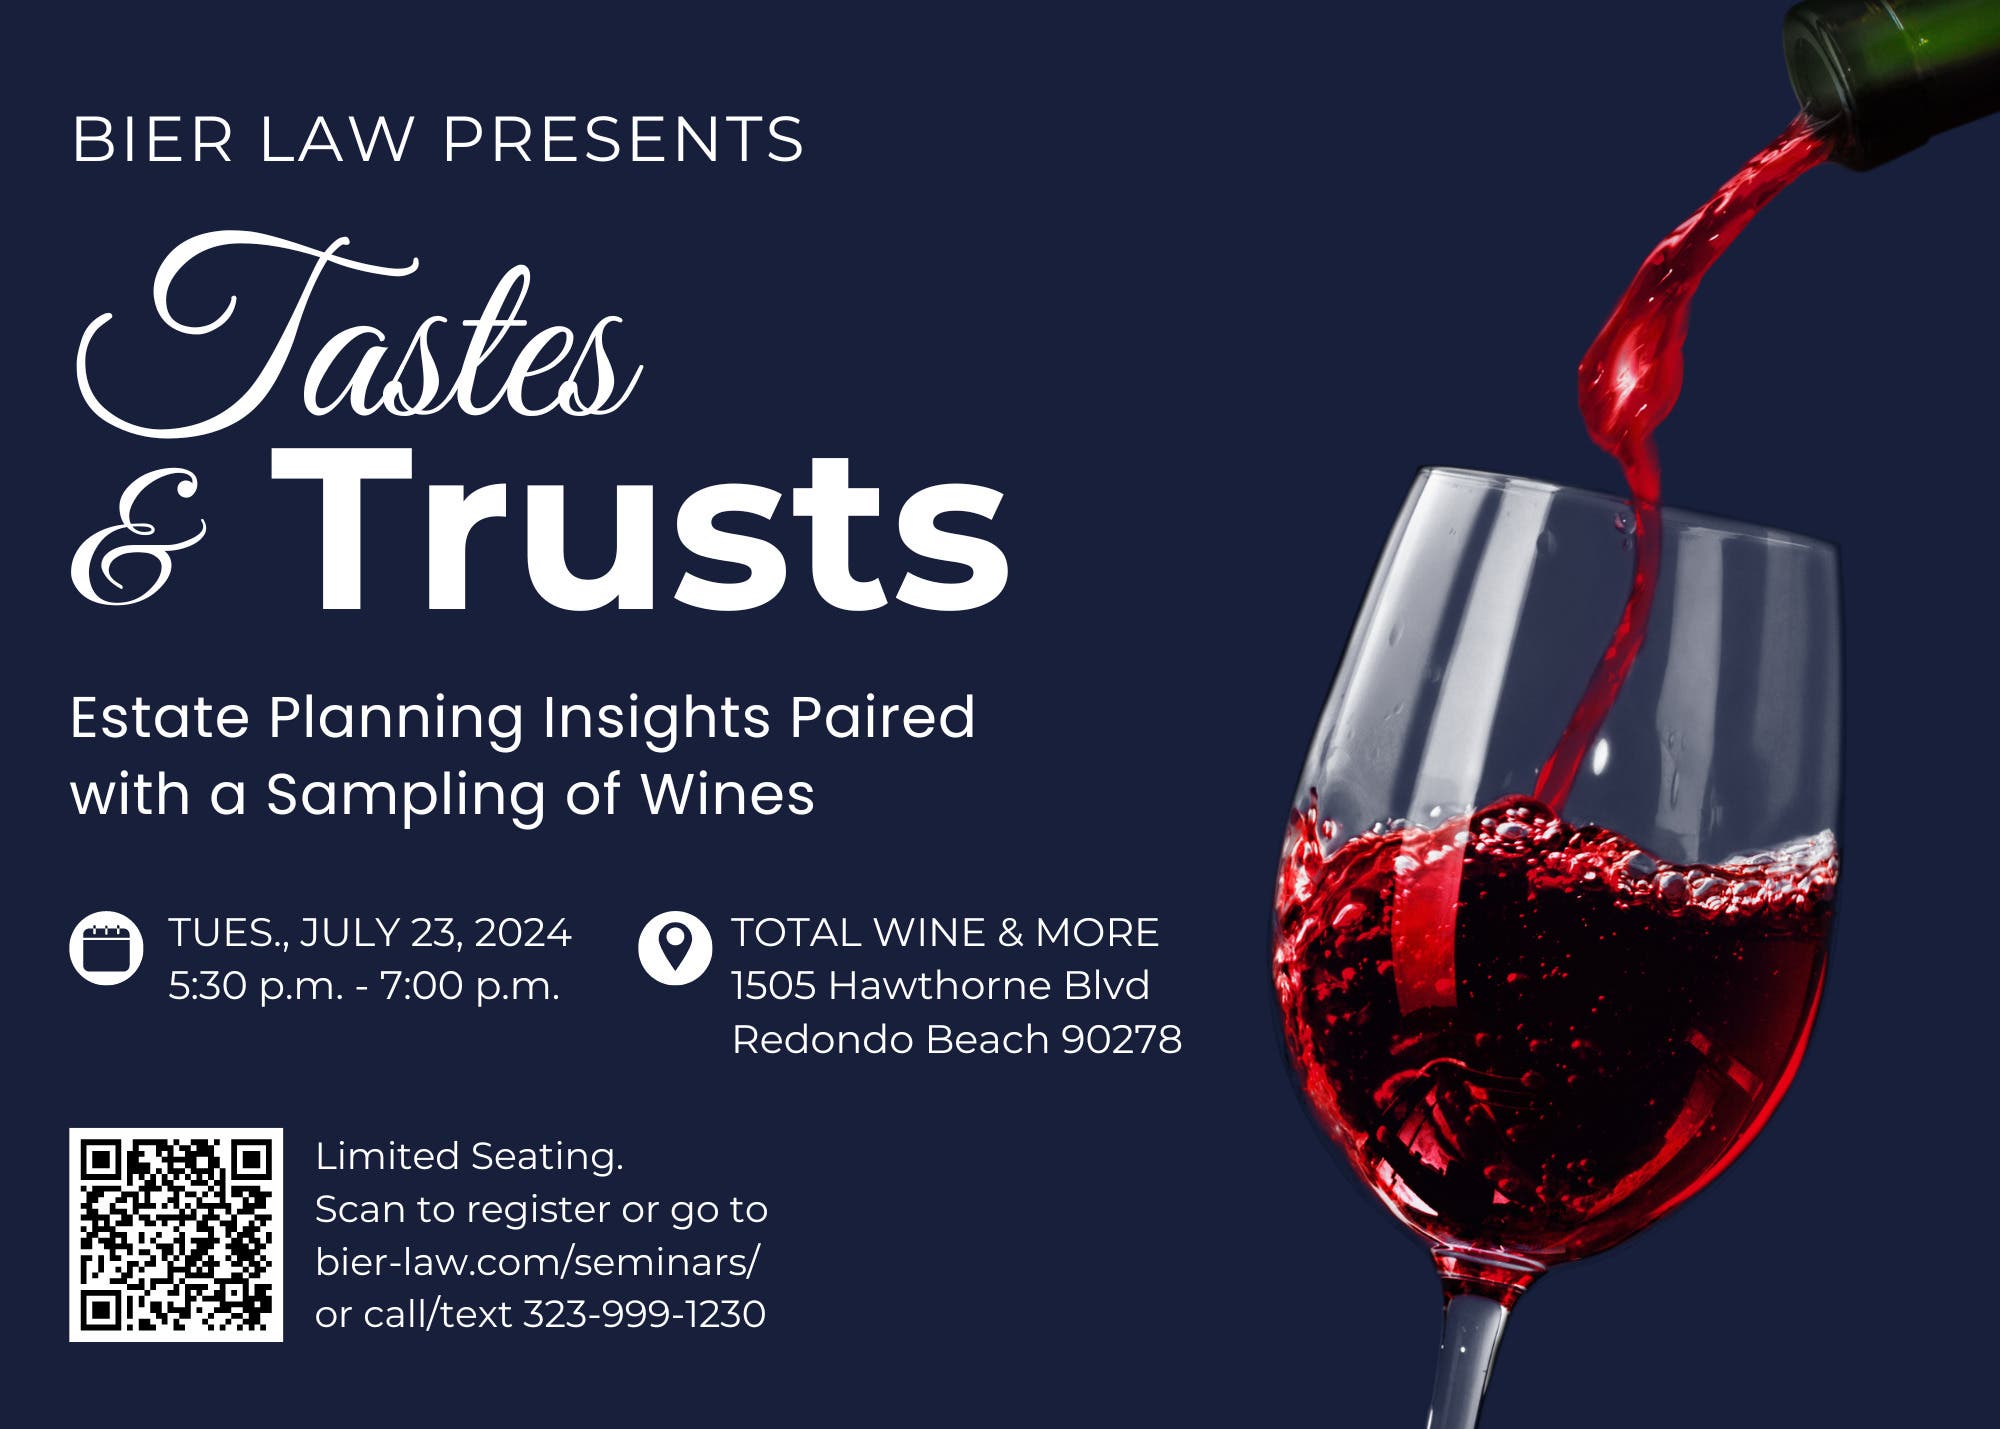 Tastes & Trusts | A FREE Evening of Wine Sampling and Estate Planning Insights